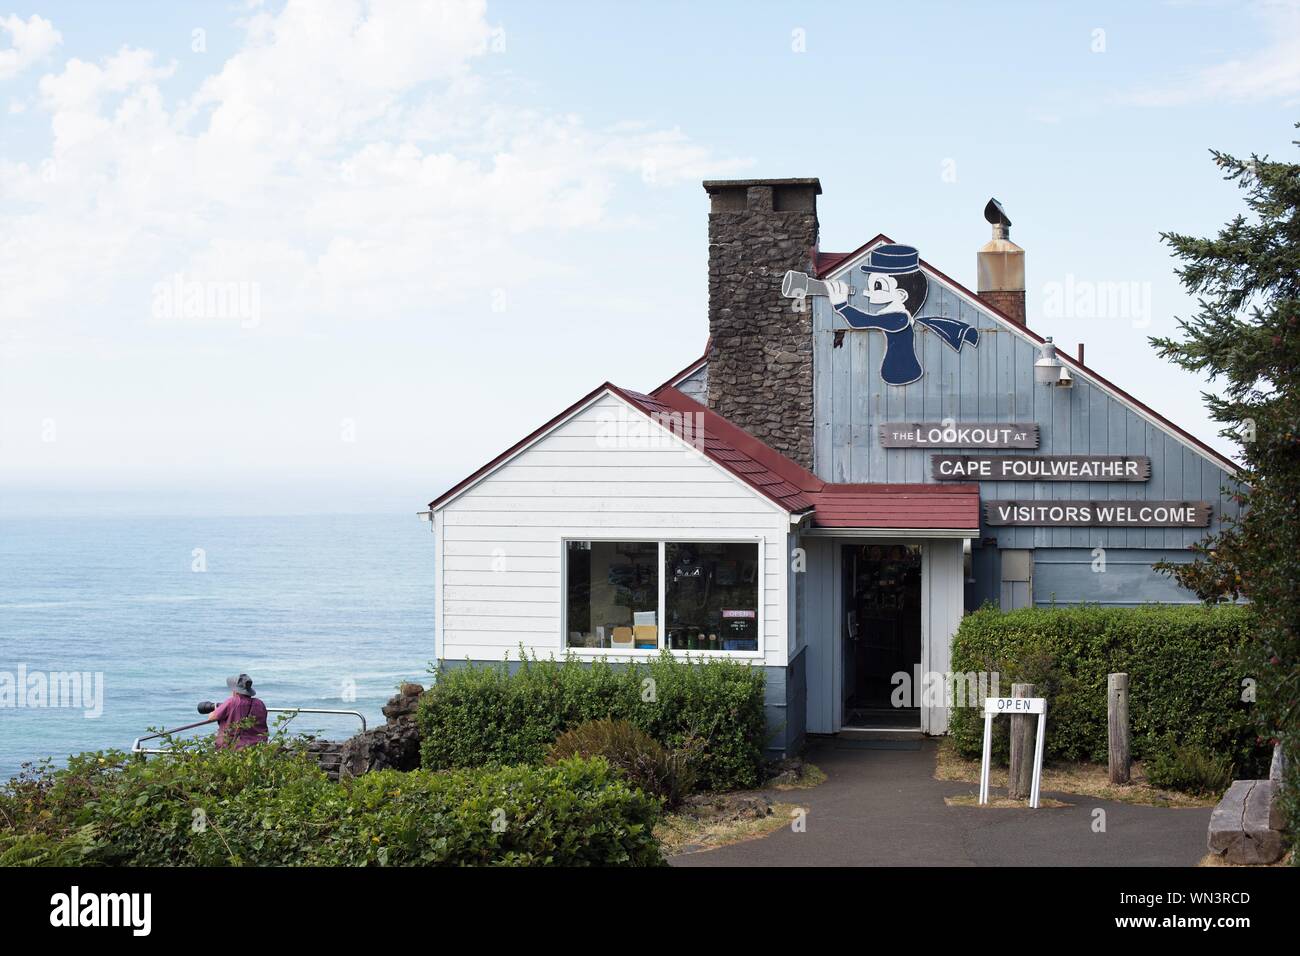 The visitor center at Cape Foulweather on the coast of Oregon, USA. Stock Photo